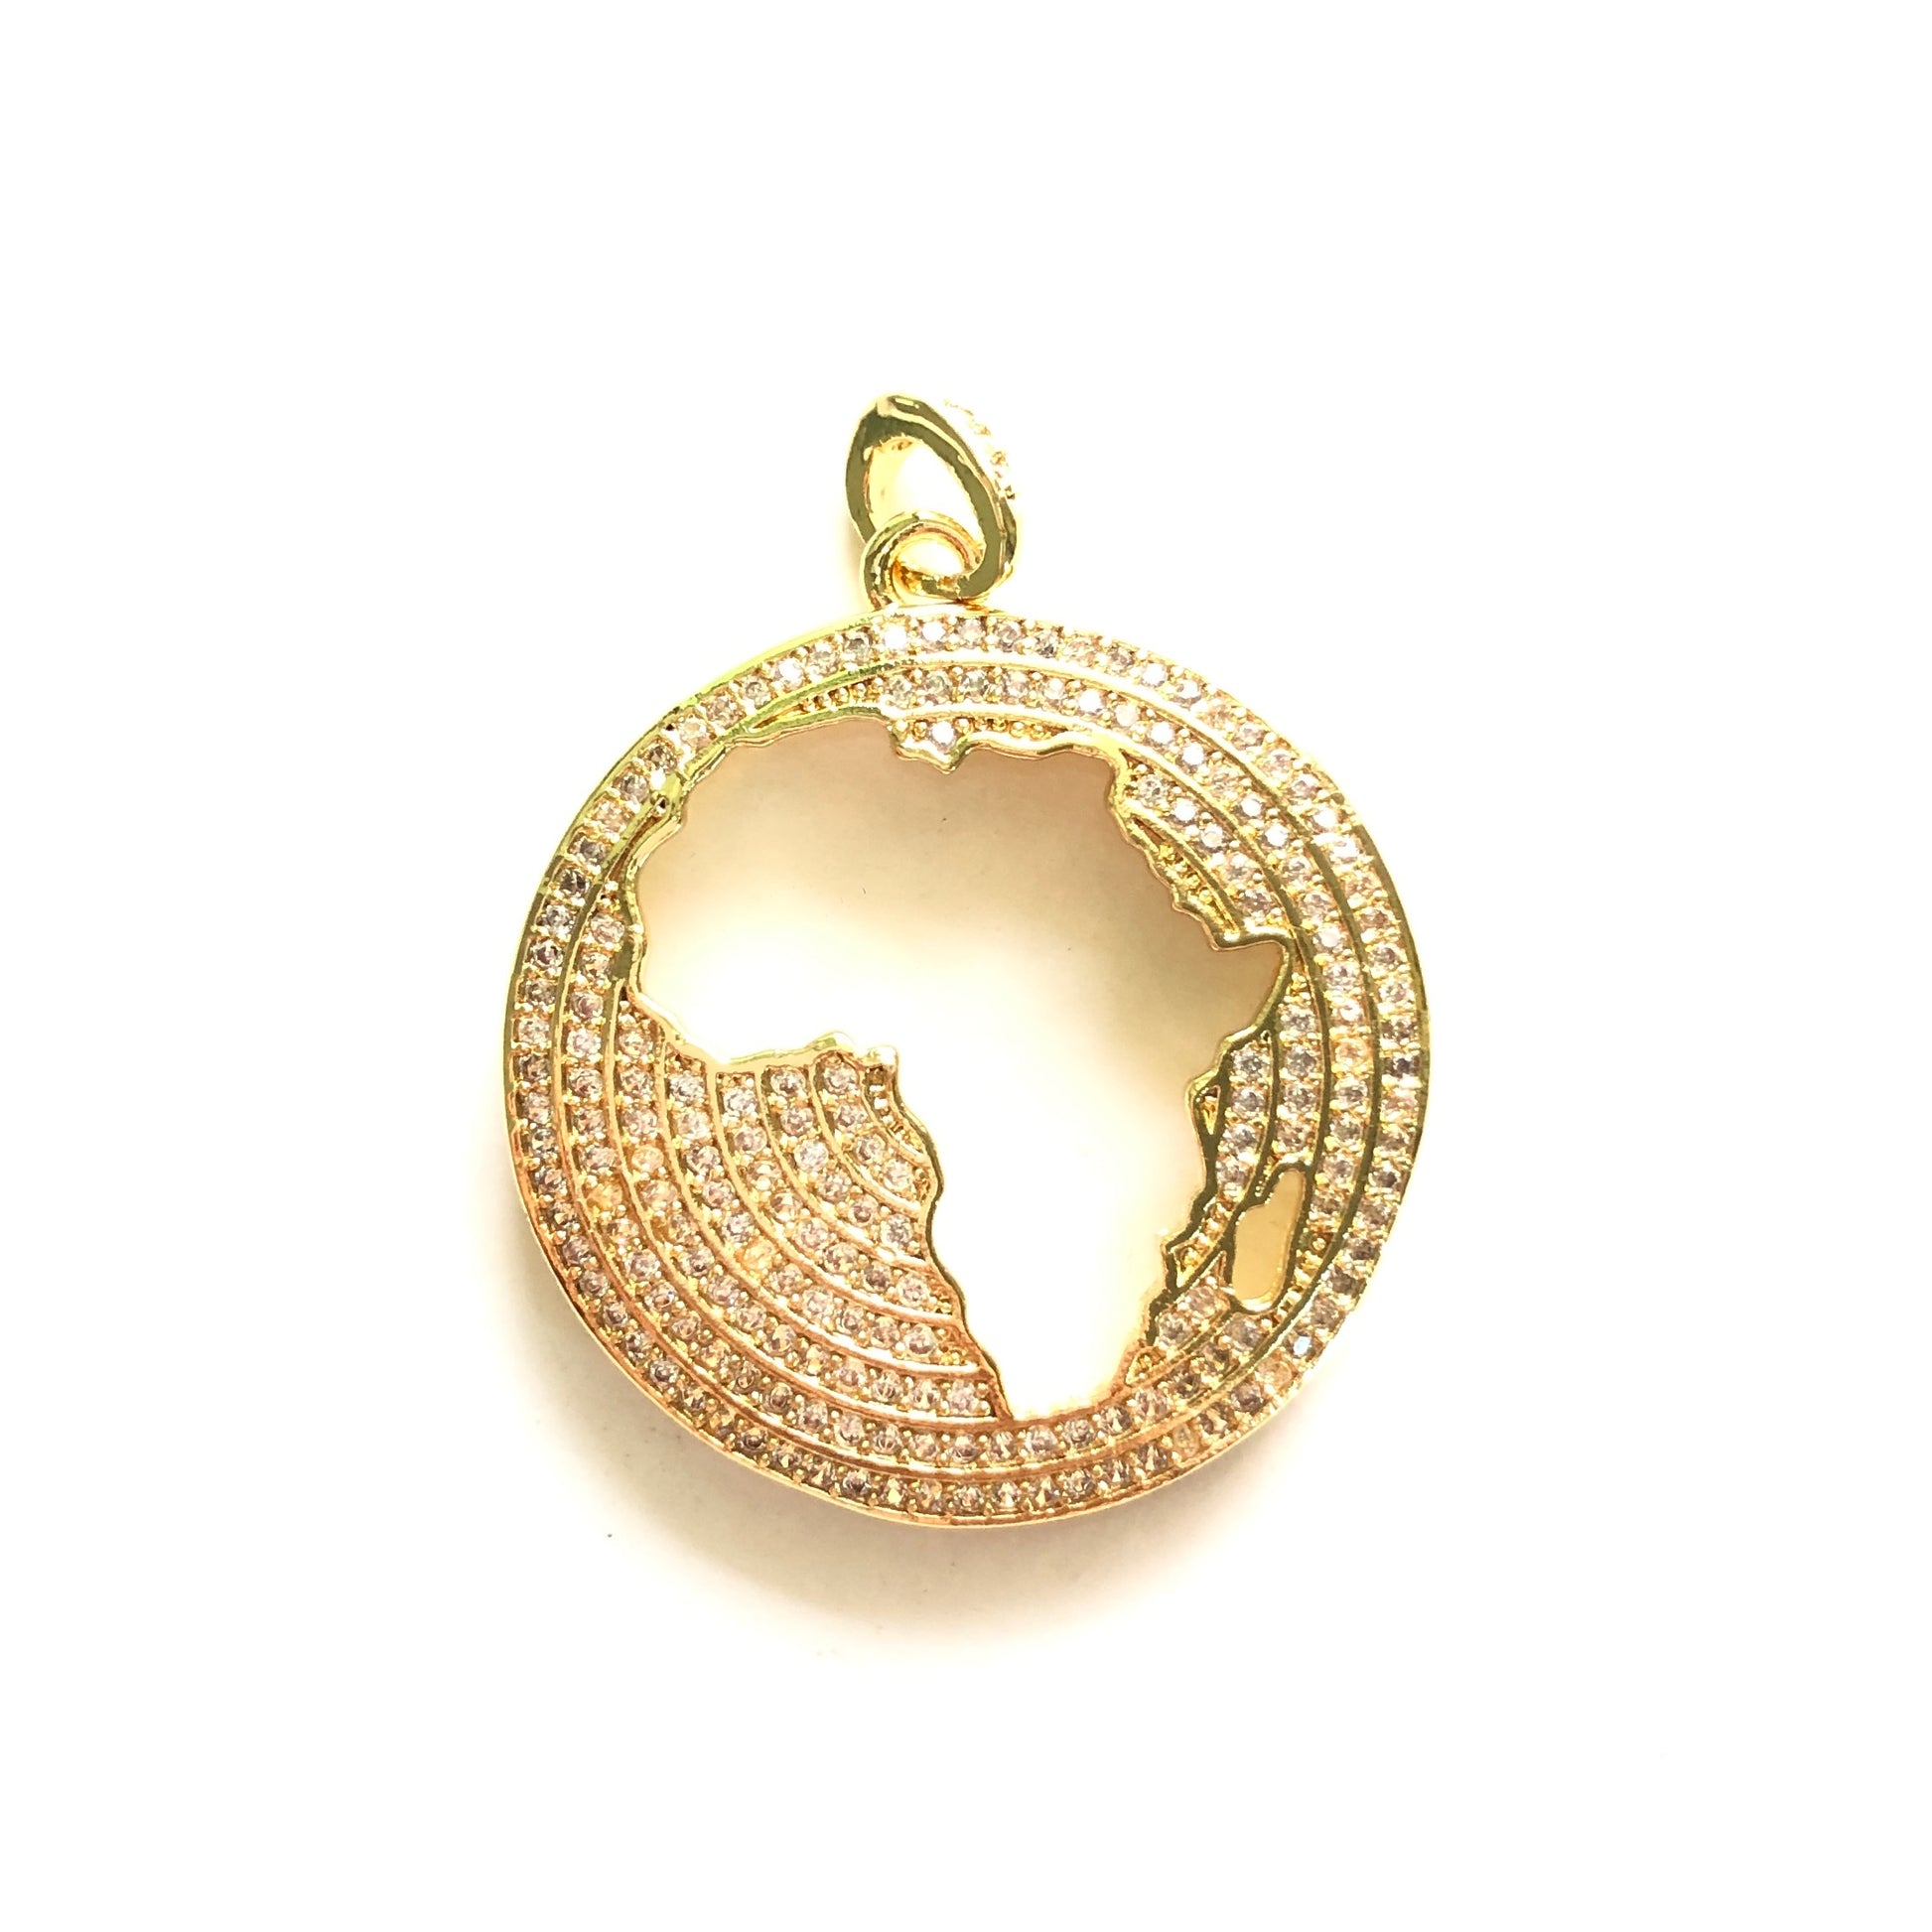 10pcs/lot 27mm CZ Paved Africa Map Charms for Black History Month Juneteenth Awareness Gold CZ Paved Charms Juneteenth & Black History Month Awareness Maps On Sale Charms Beads Beyond